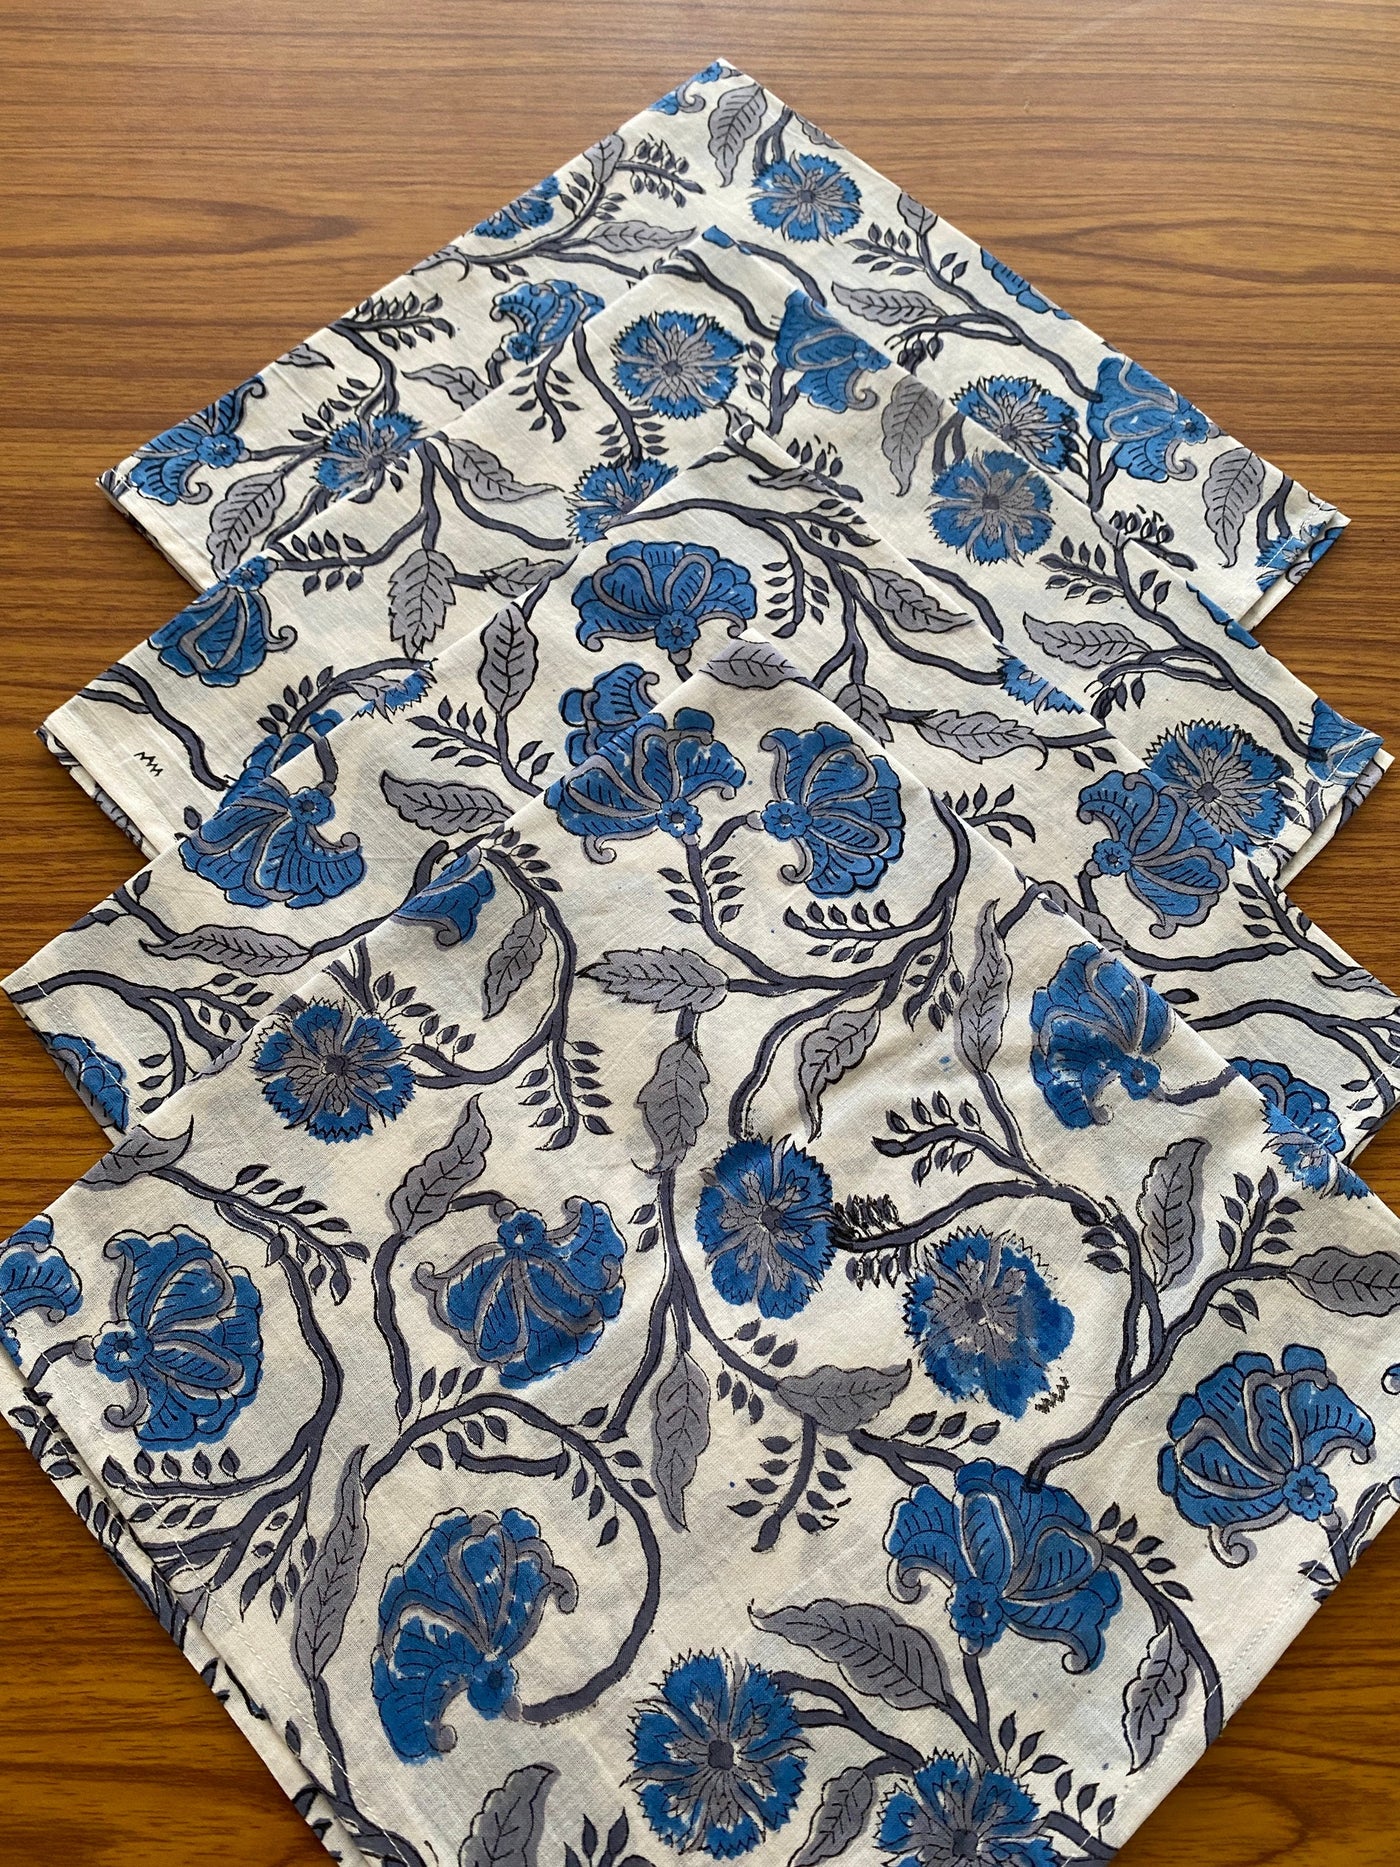 Fabricrush Aqua and Pigeon Blue Floral Indian Hand Block Printed 100% Pure Cotton Cloth Napkins, Christmas Gifts 18x18" Dinner napkins 20x20"